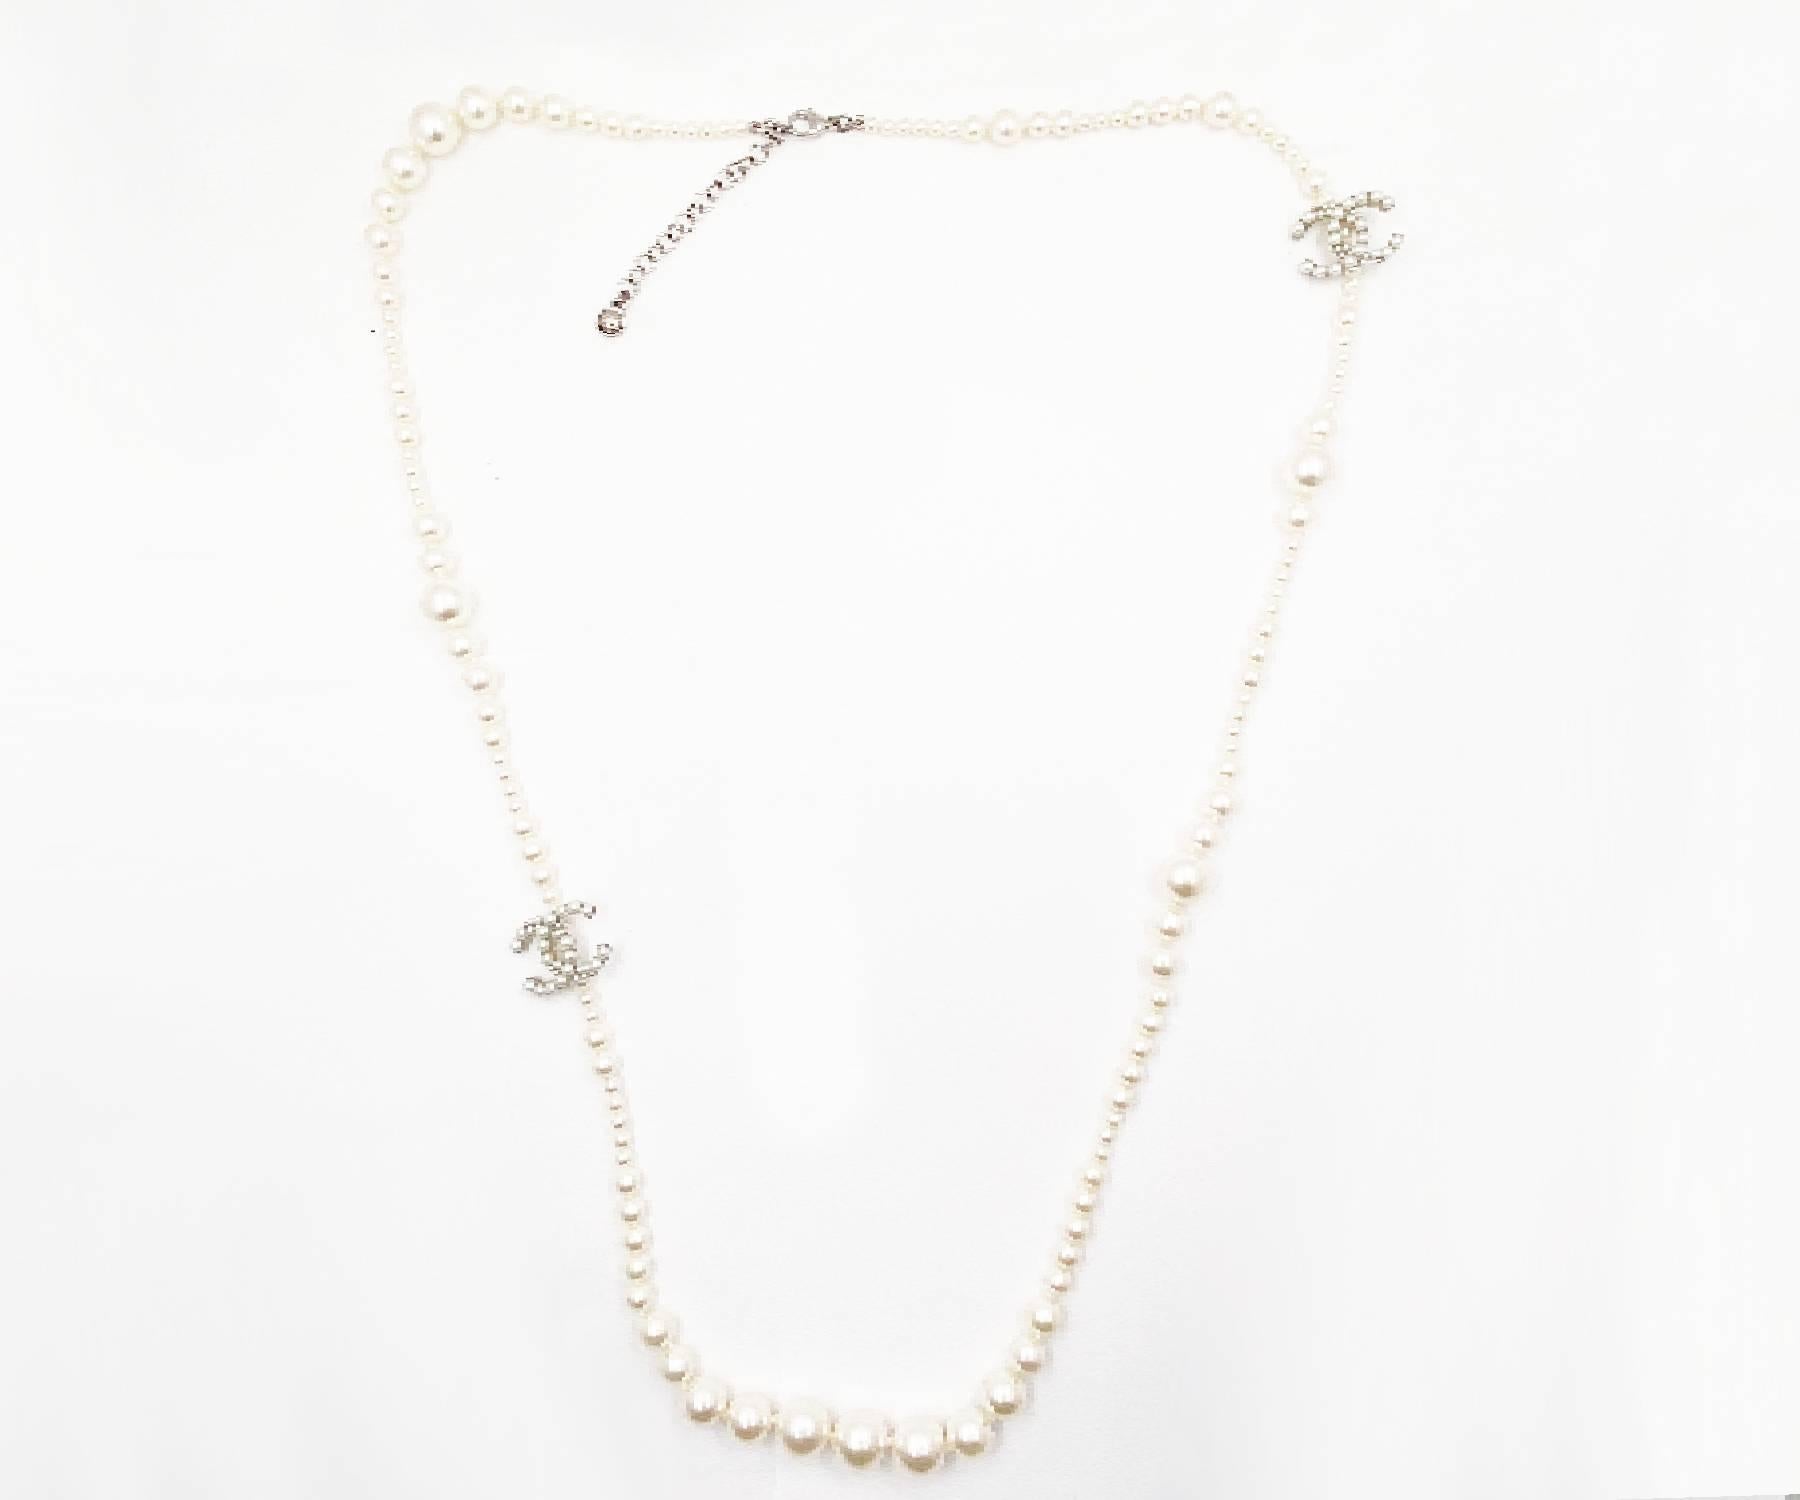 Chanel Silver CC Bubble Pearl Pearl Necklace

*Marked 14
*Made in France
*Comes with original box and pouch

-Approximately 36″
-The pendants are approximately 0.75″ x 1″.
-Very classic and pretty
-It is in a very good condition. There are some